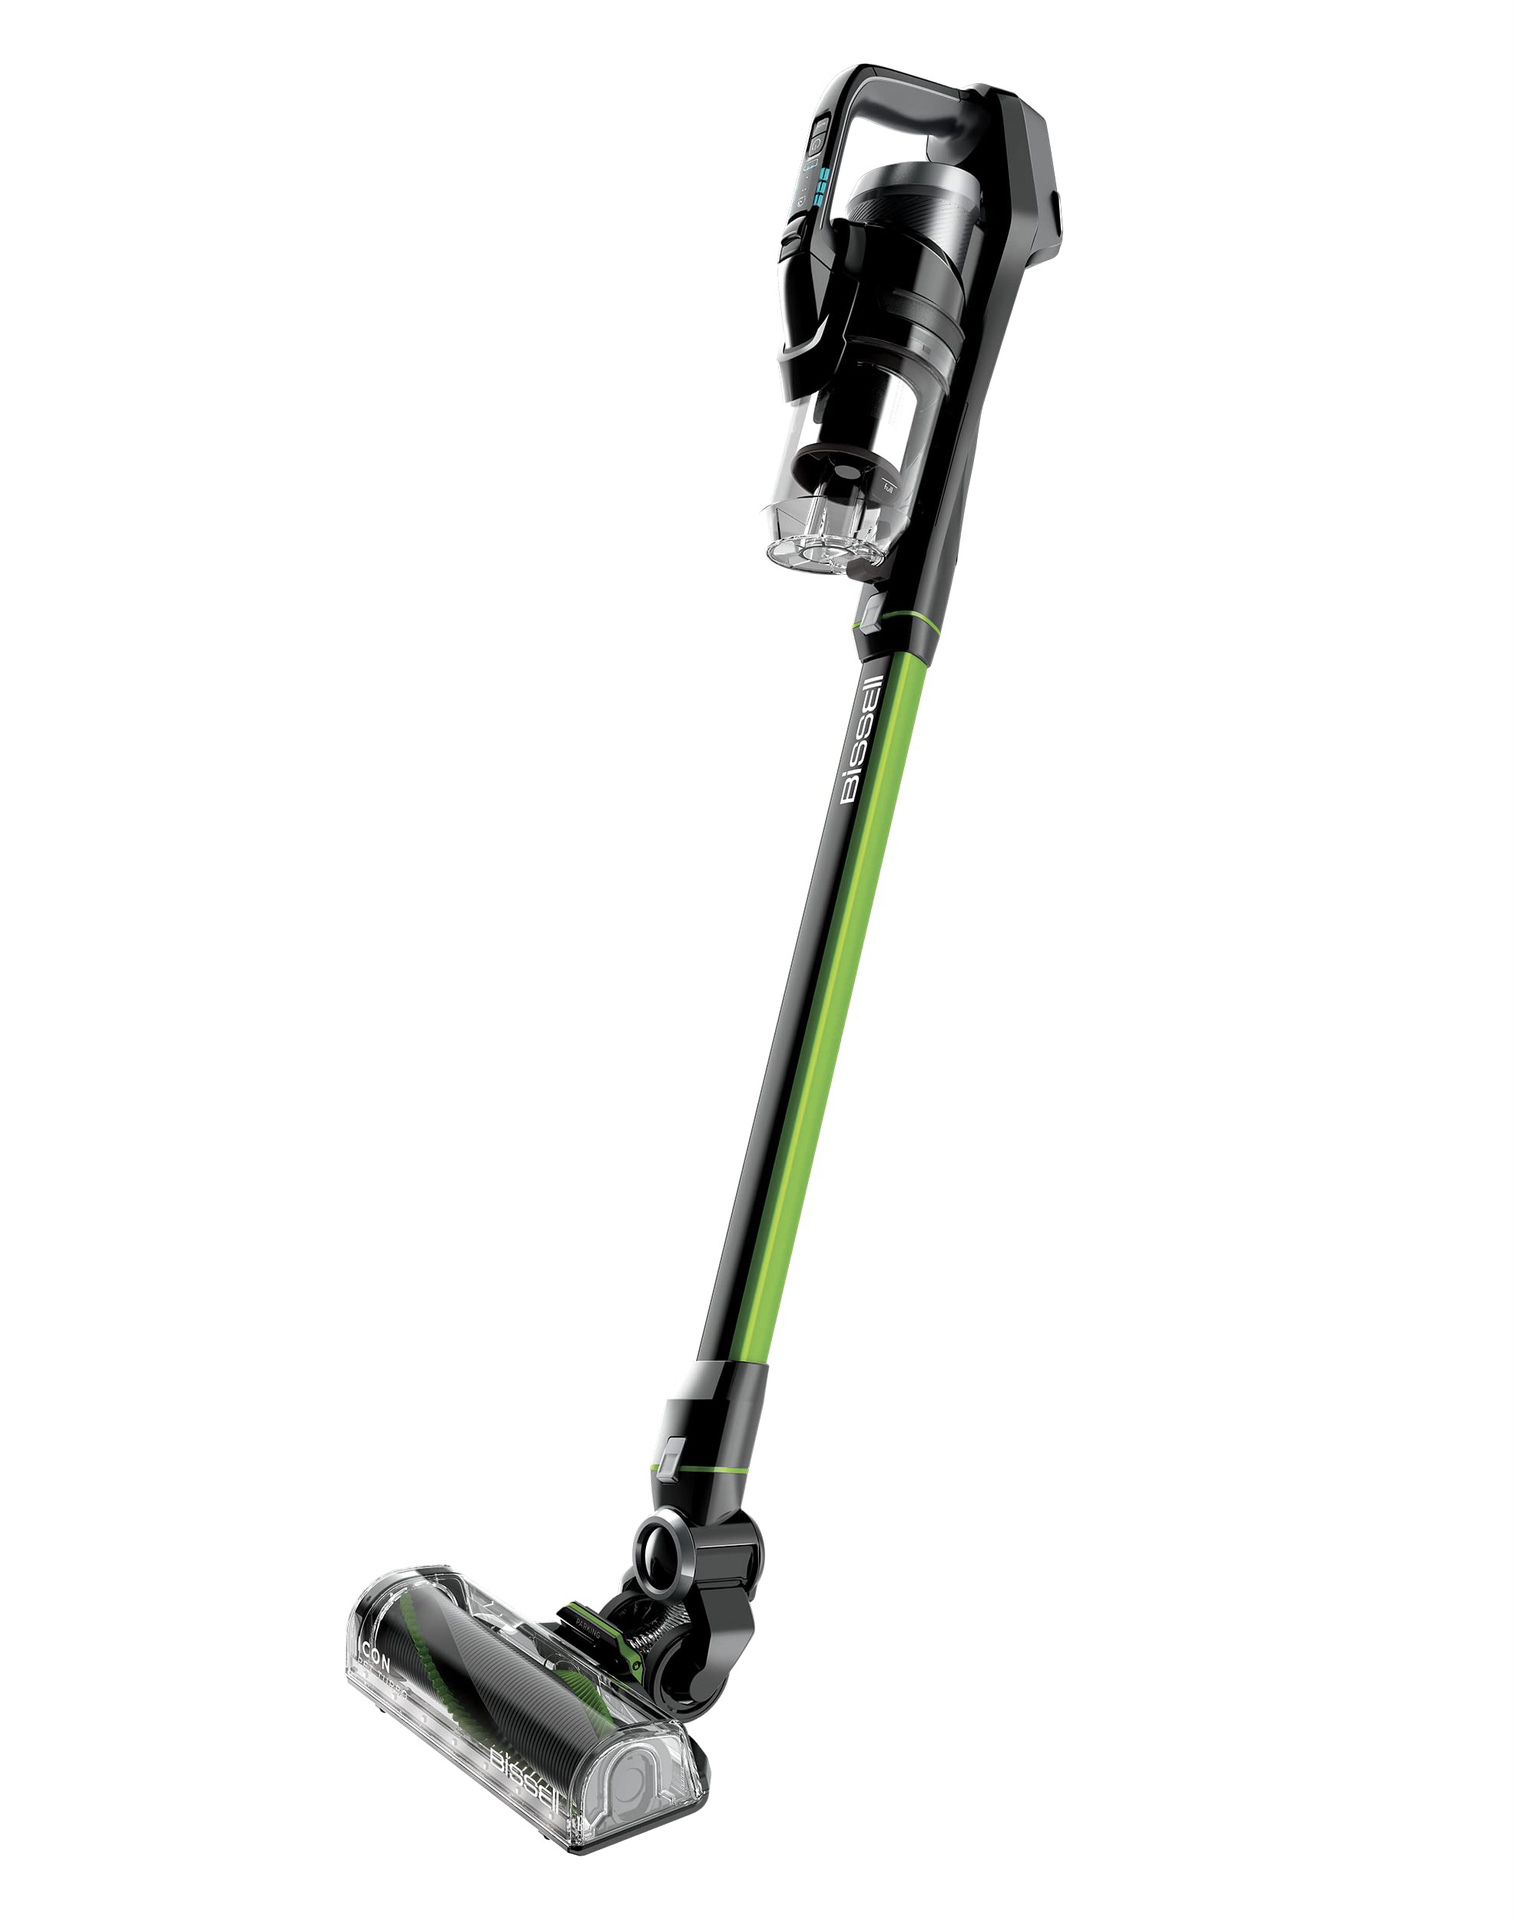 New In Box Bissell ICONpet Turbo Edge Vacuum Cleaner, 3177A (retail $400)